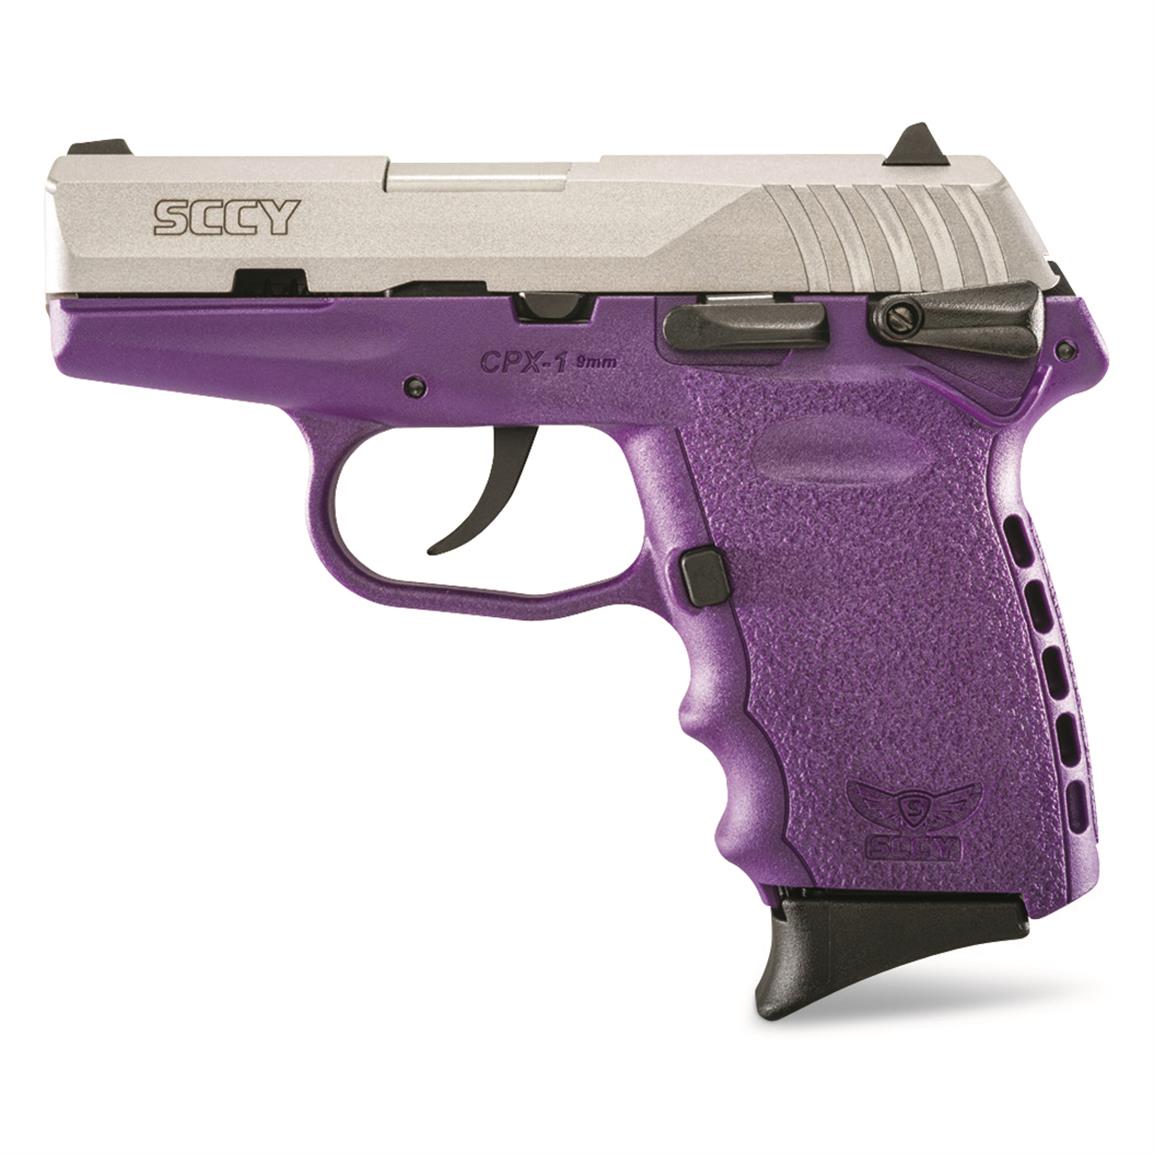 SCCY CPX-1, Semi-automatic, 9mm, 3.1" Barrel, Purple/Stainless, 10+1 Rounds